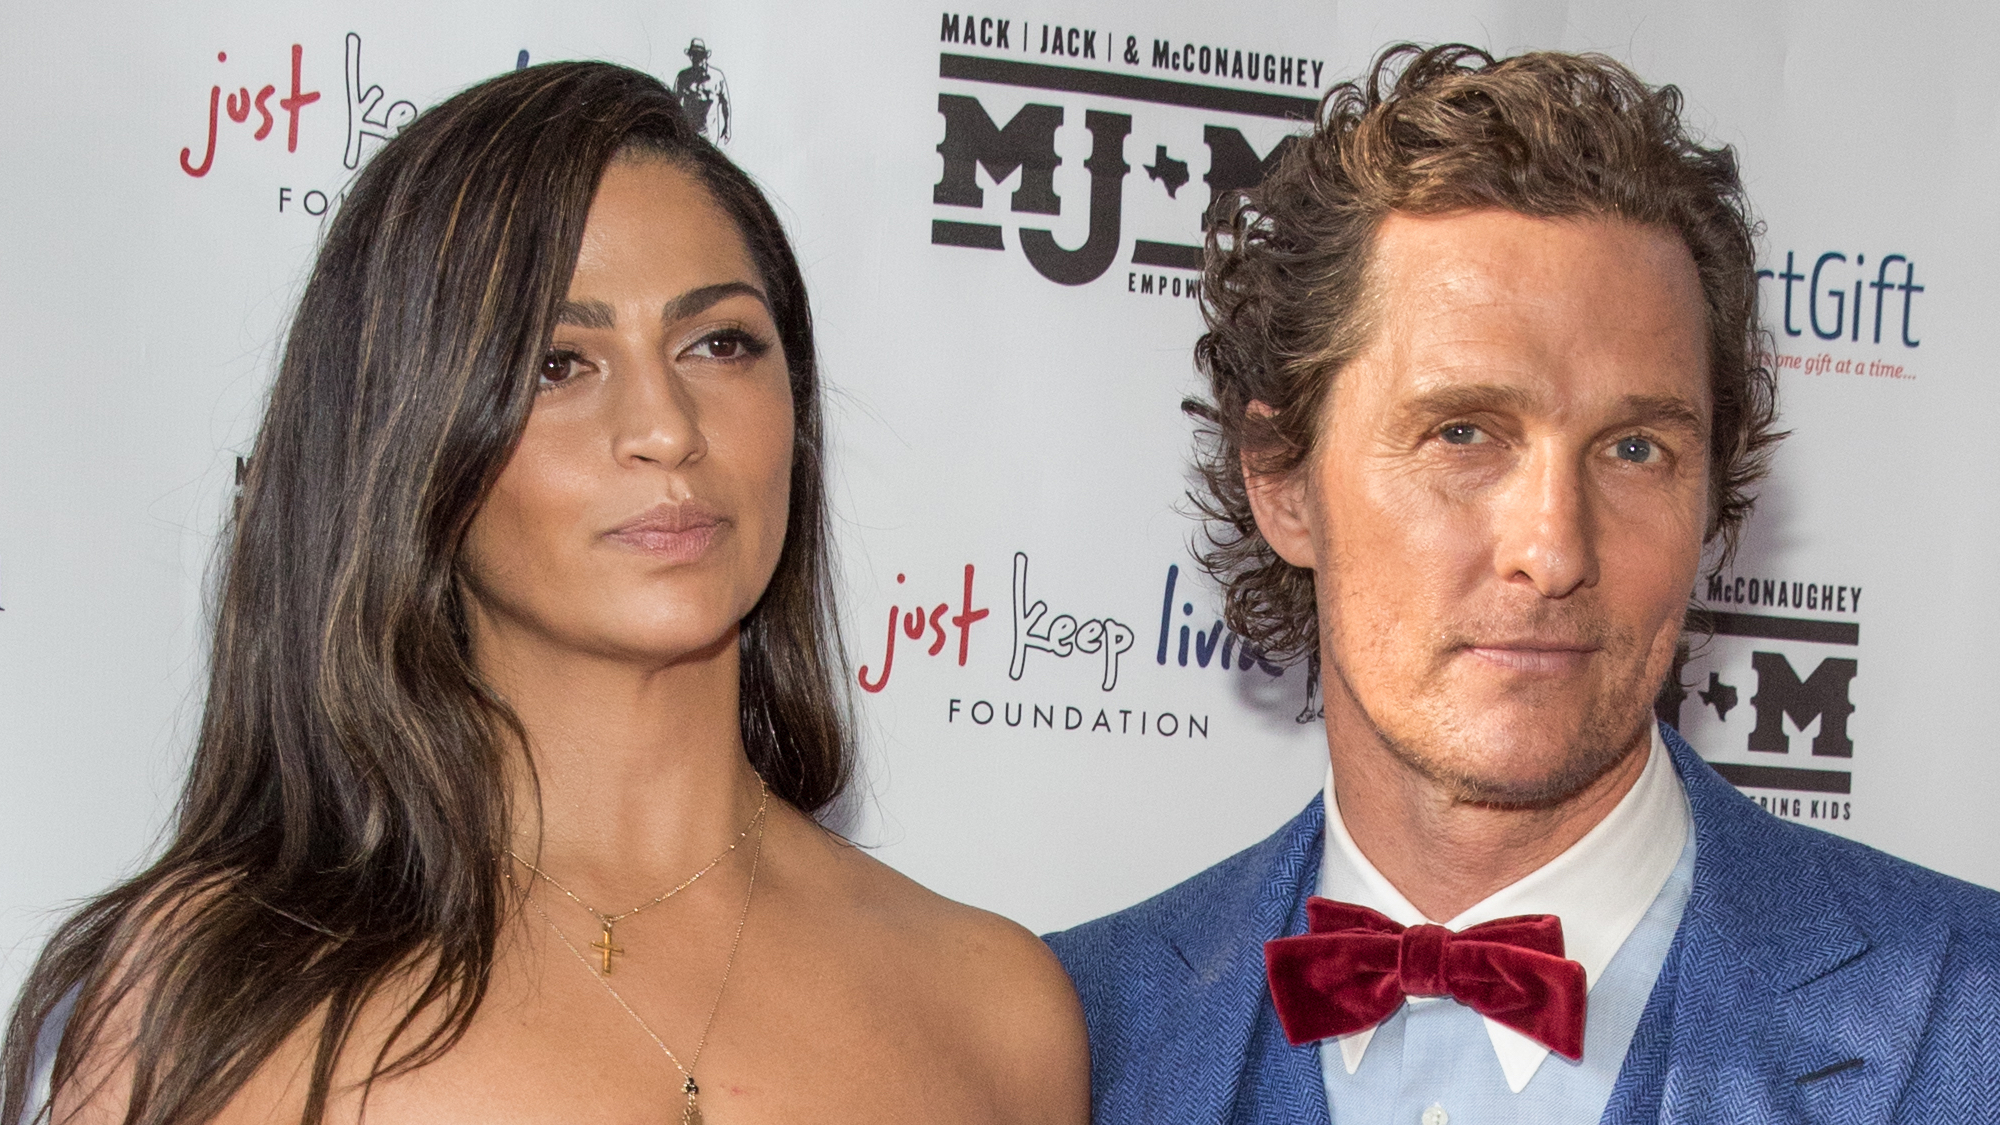 Matthew McConaughey and spouse share secrets to a thriving marriage